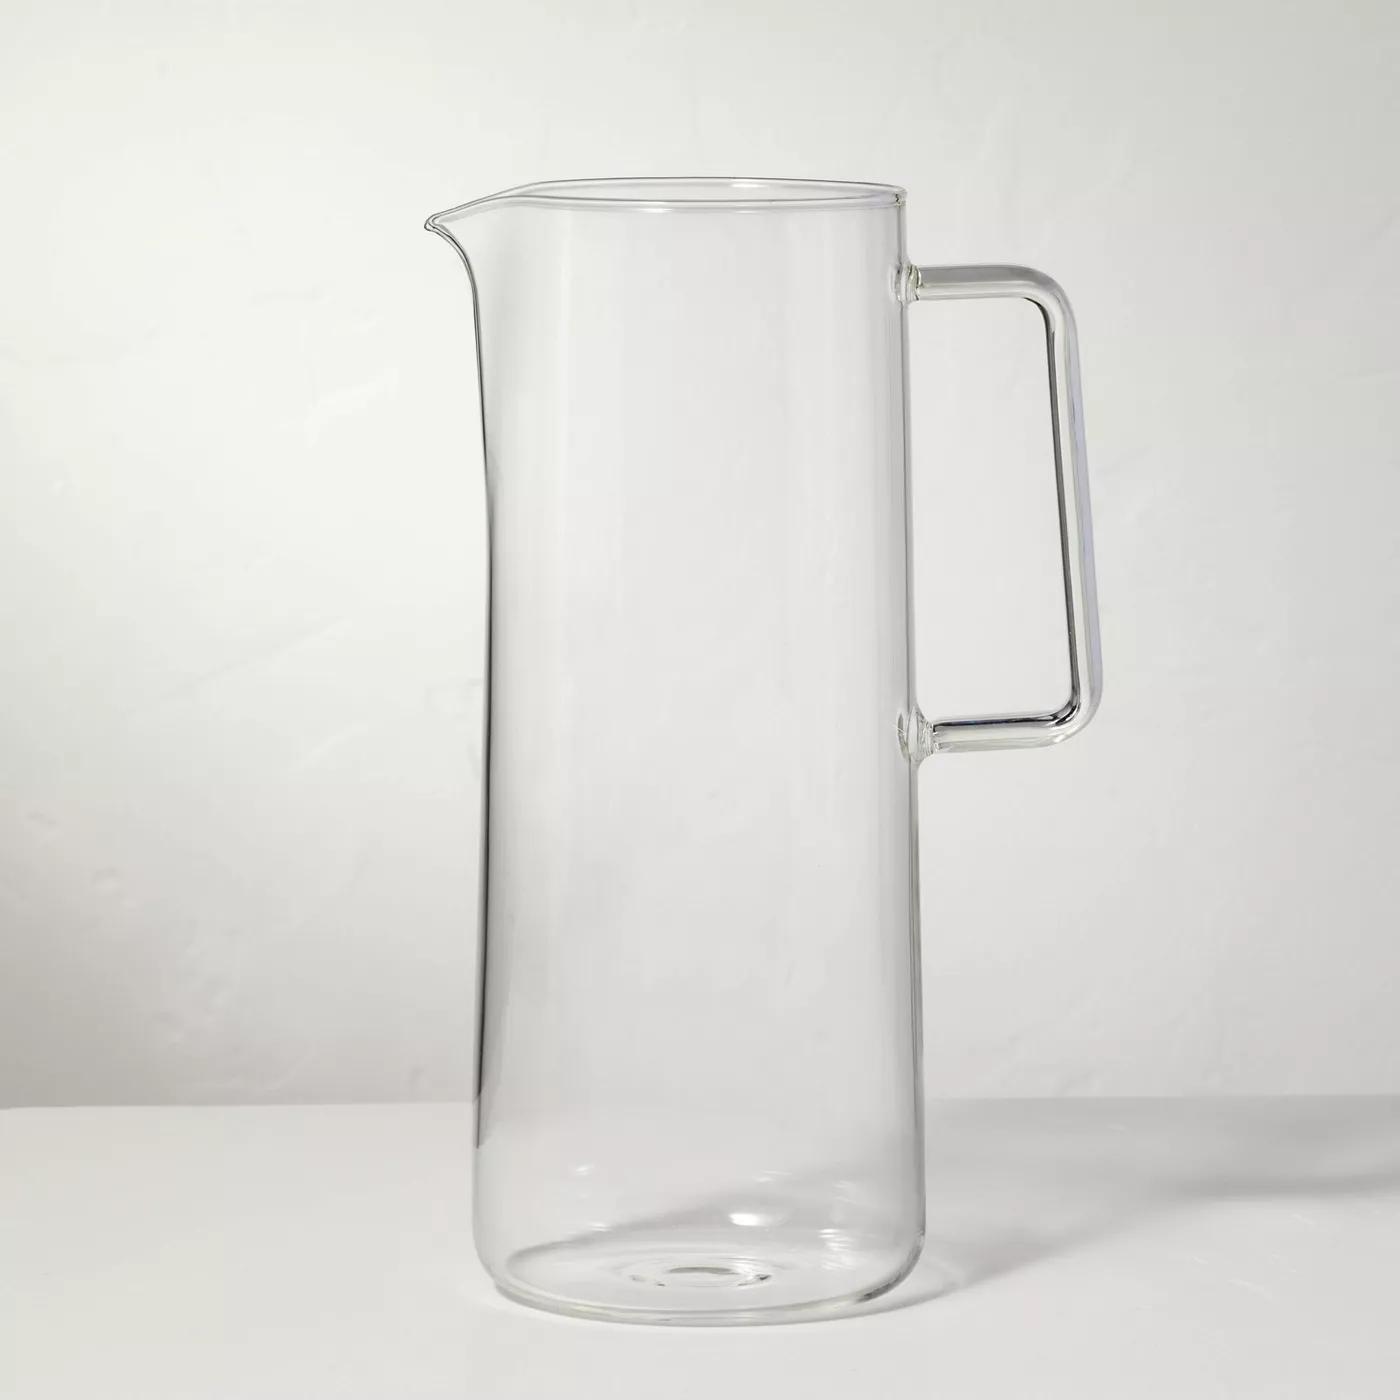 Glass Pitcher - Hearth & Hand™ with Magnolia - image 1 of 6